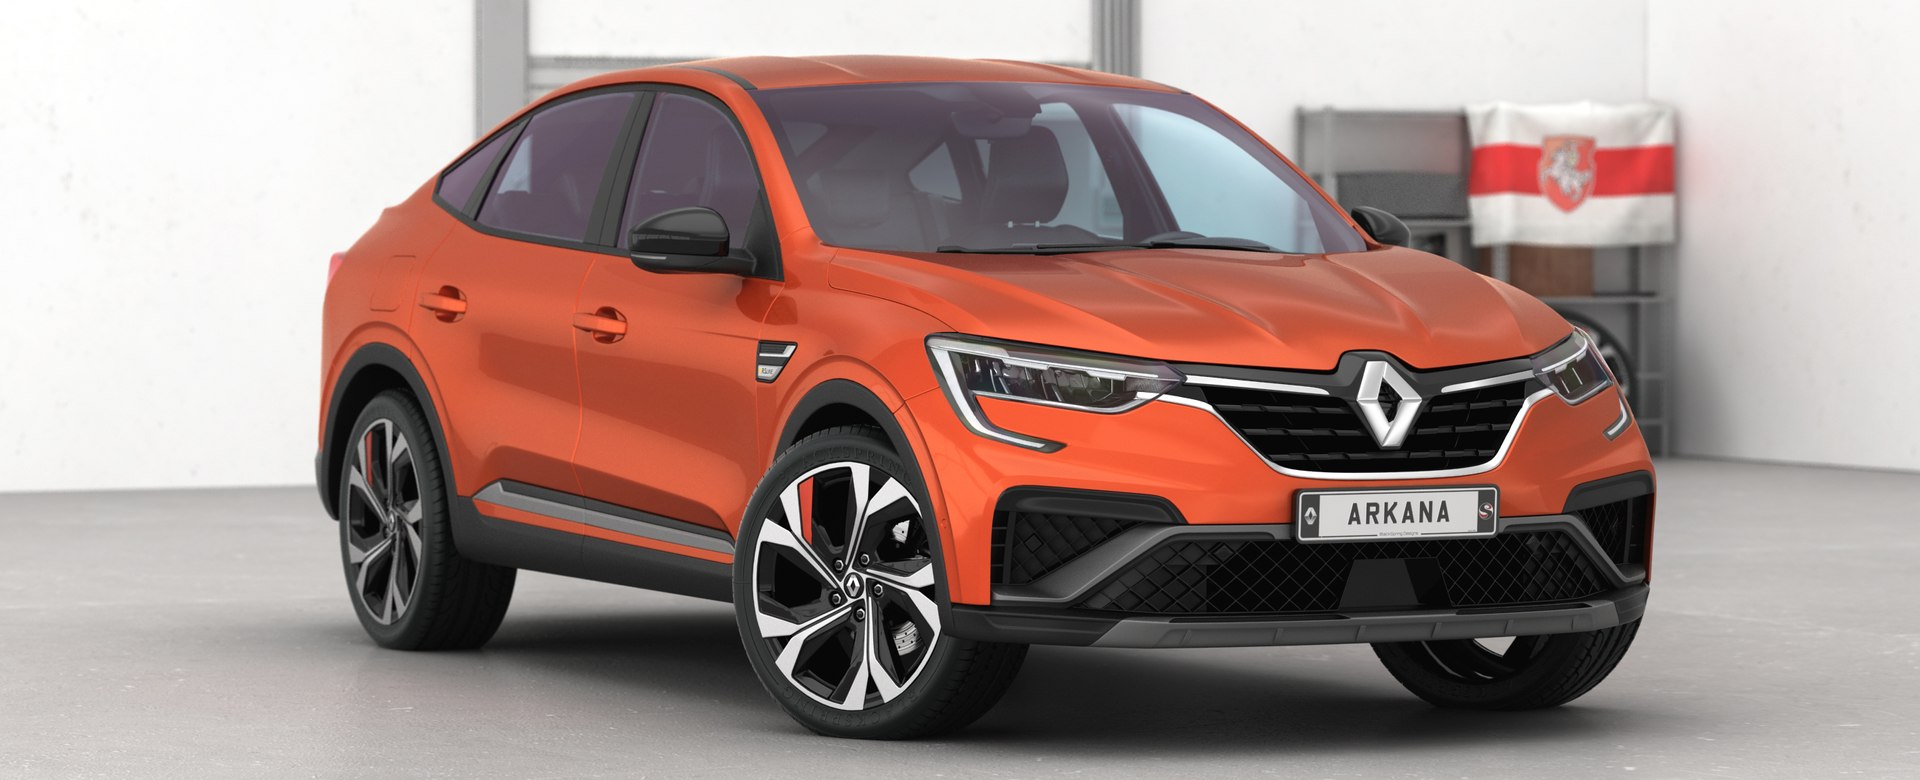 Renault Arkana crossover updated for 2022 - Business Biscuit